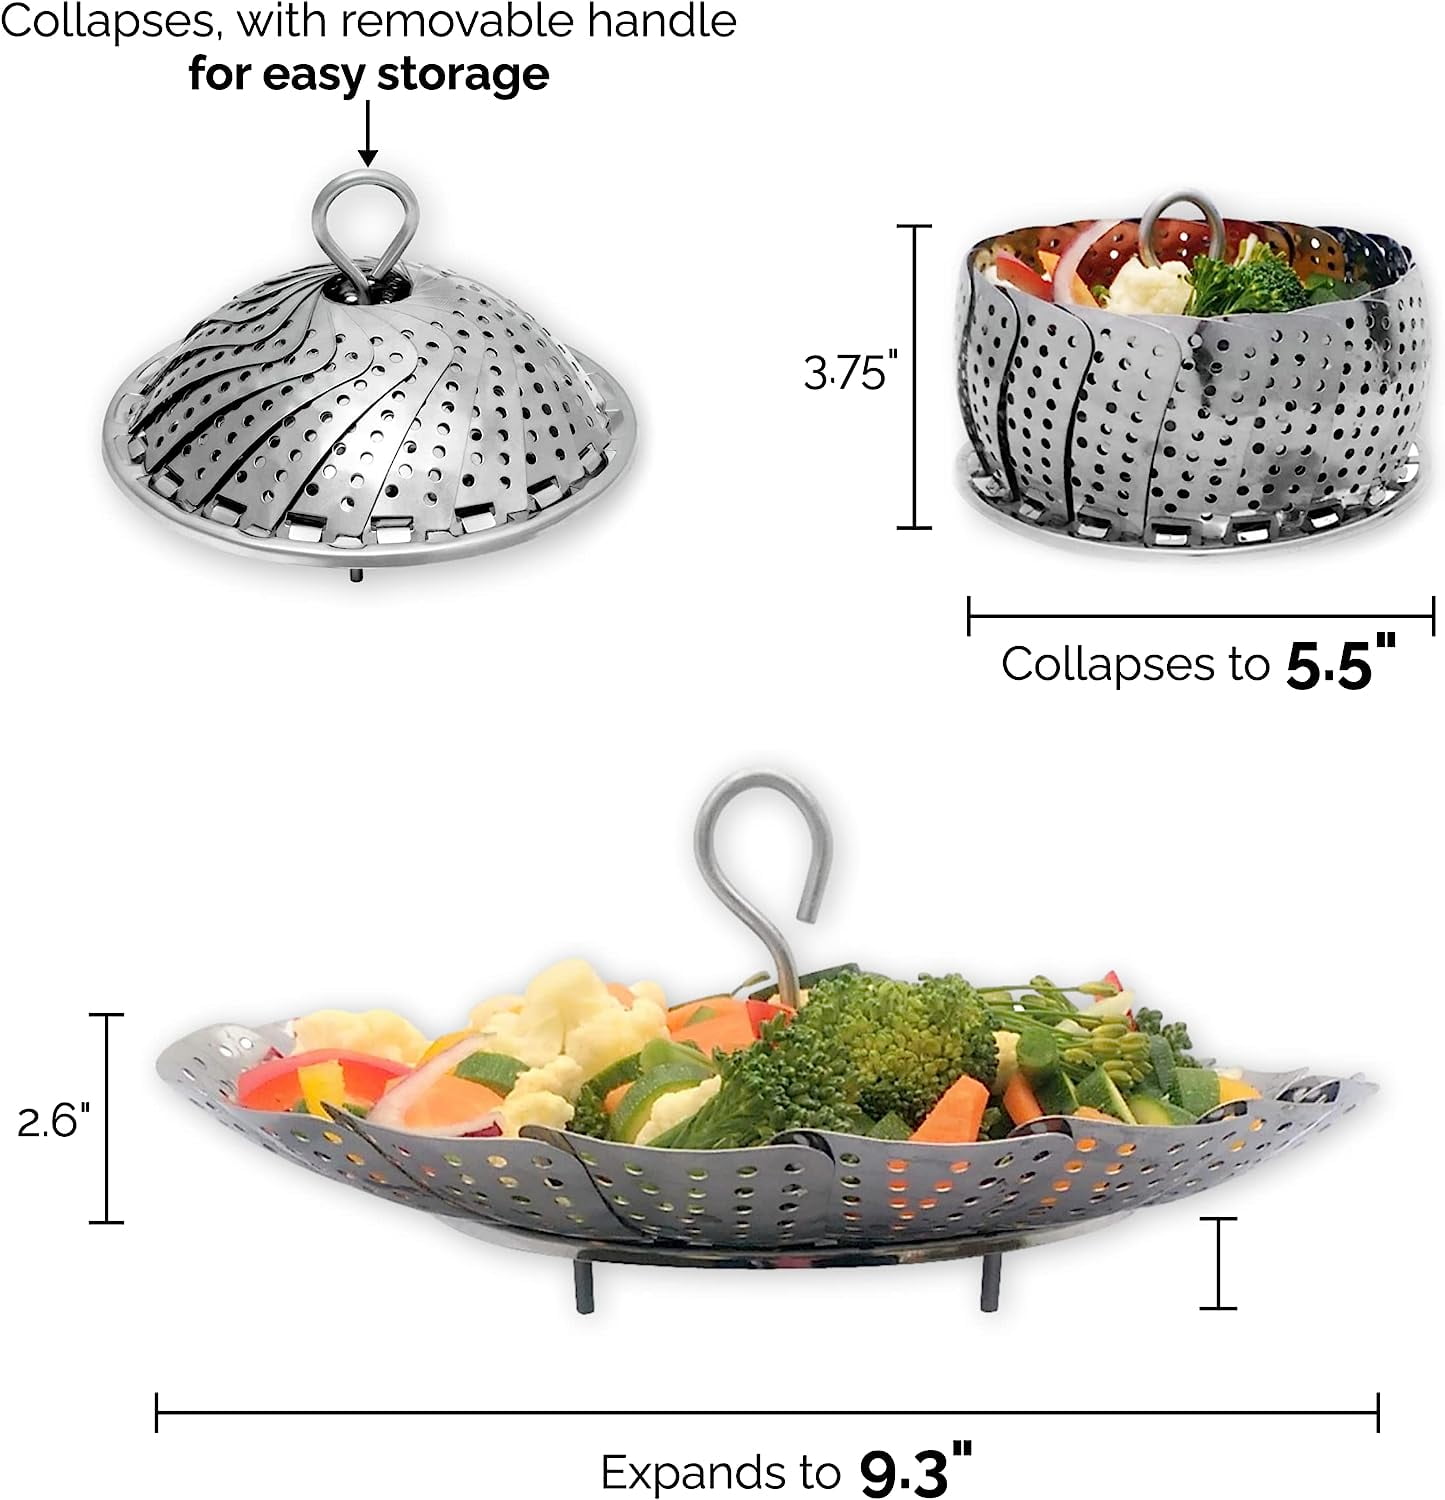 Flexzion Stainless Steel Vegetable Steamer Basket with Extendable Handle -  Expandable Collapsible Foldable Cooking Insert Fit Instant Pot 3 6 8 Qt